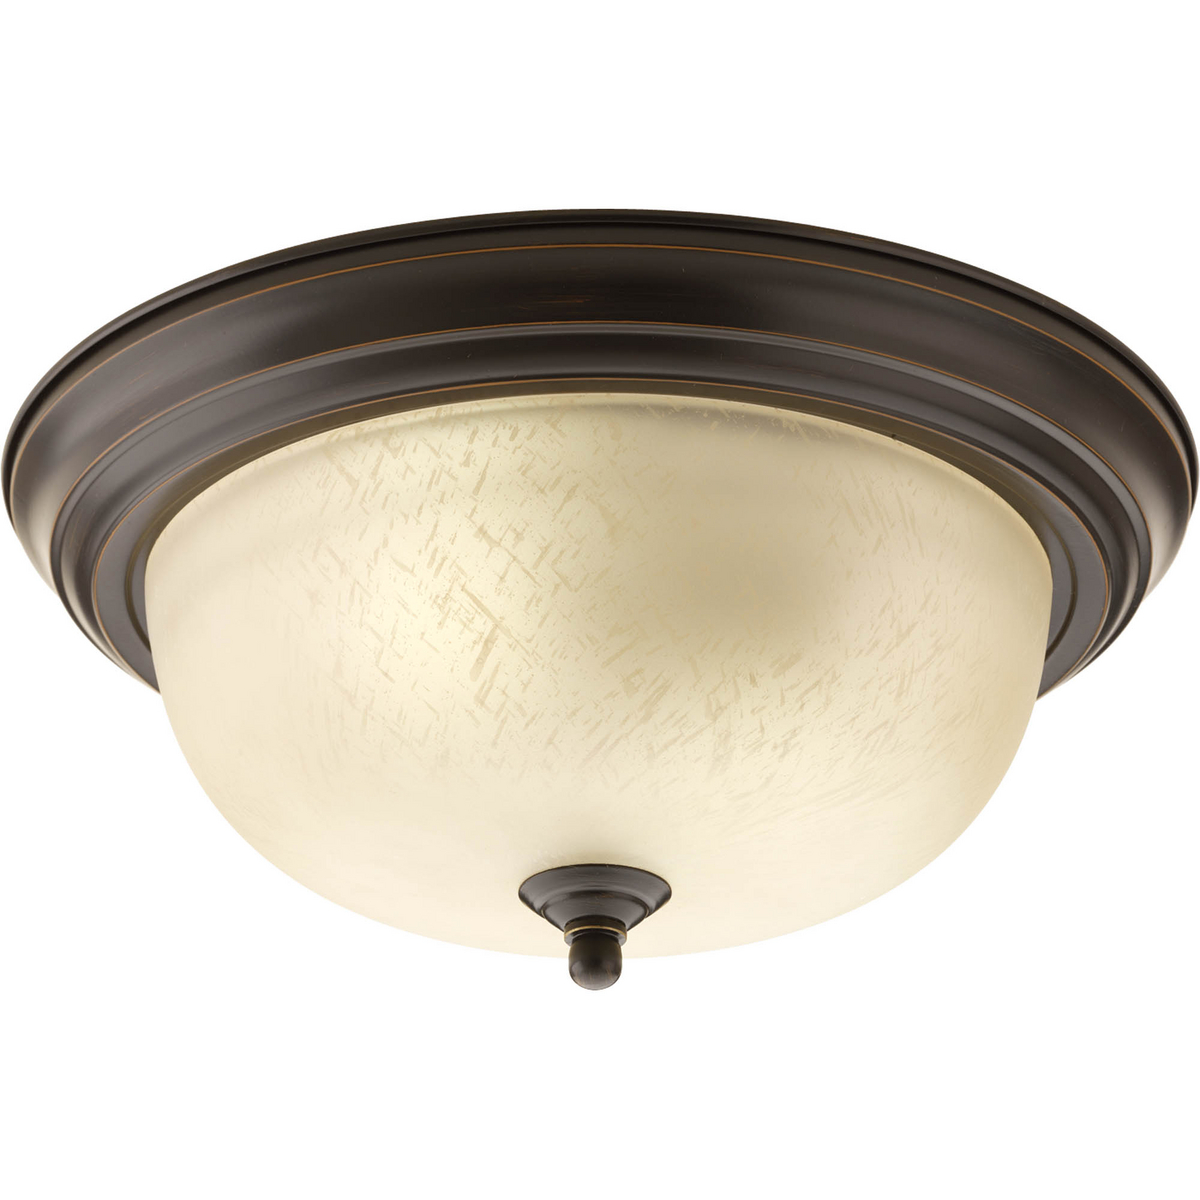 Two-light flush mount with dome shaped etched umber linen glass, solid trim and decorative knobs. Center lock-up with matching finial.